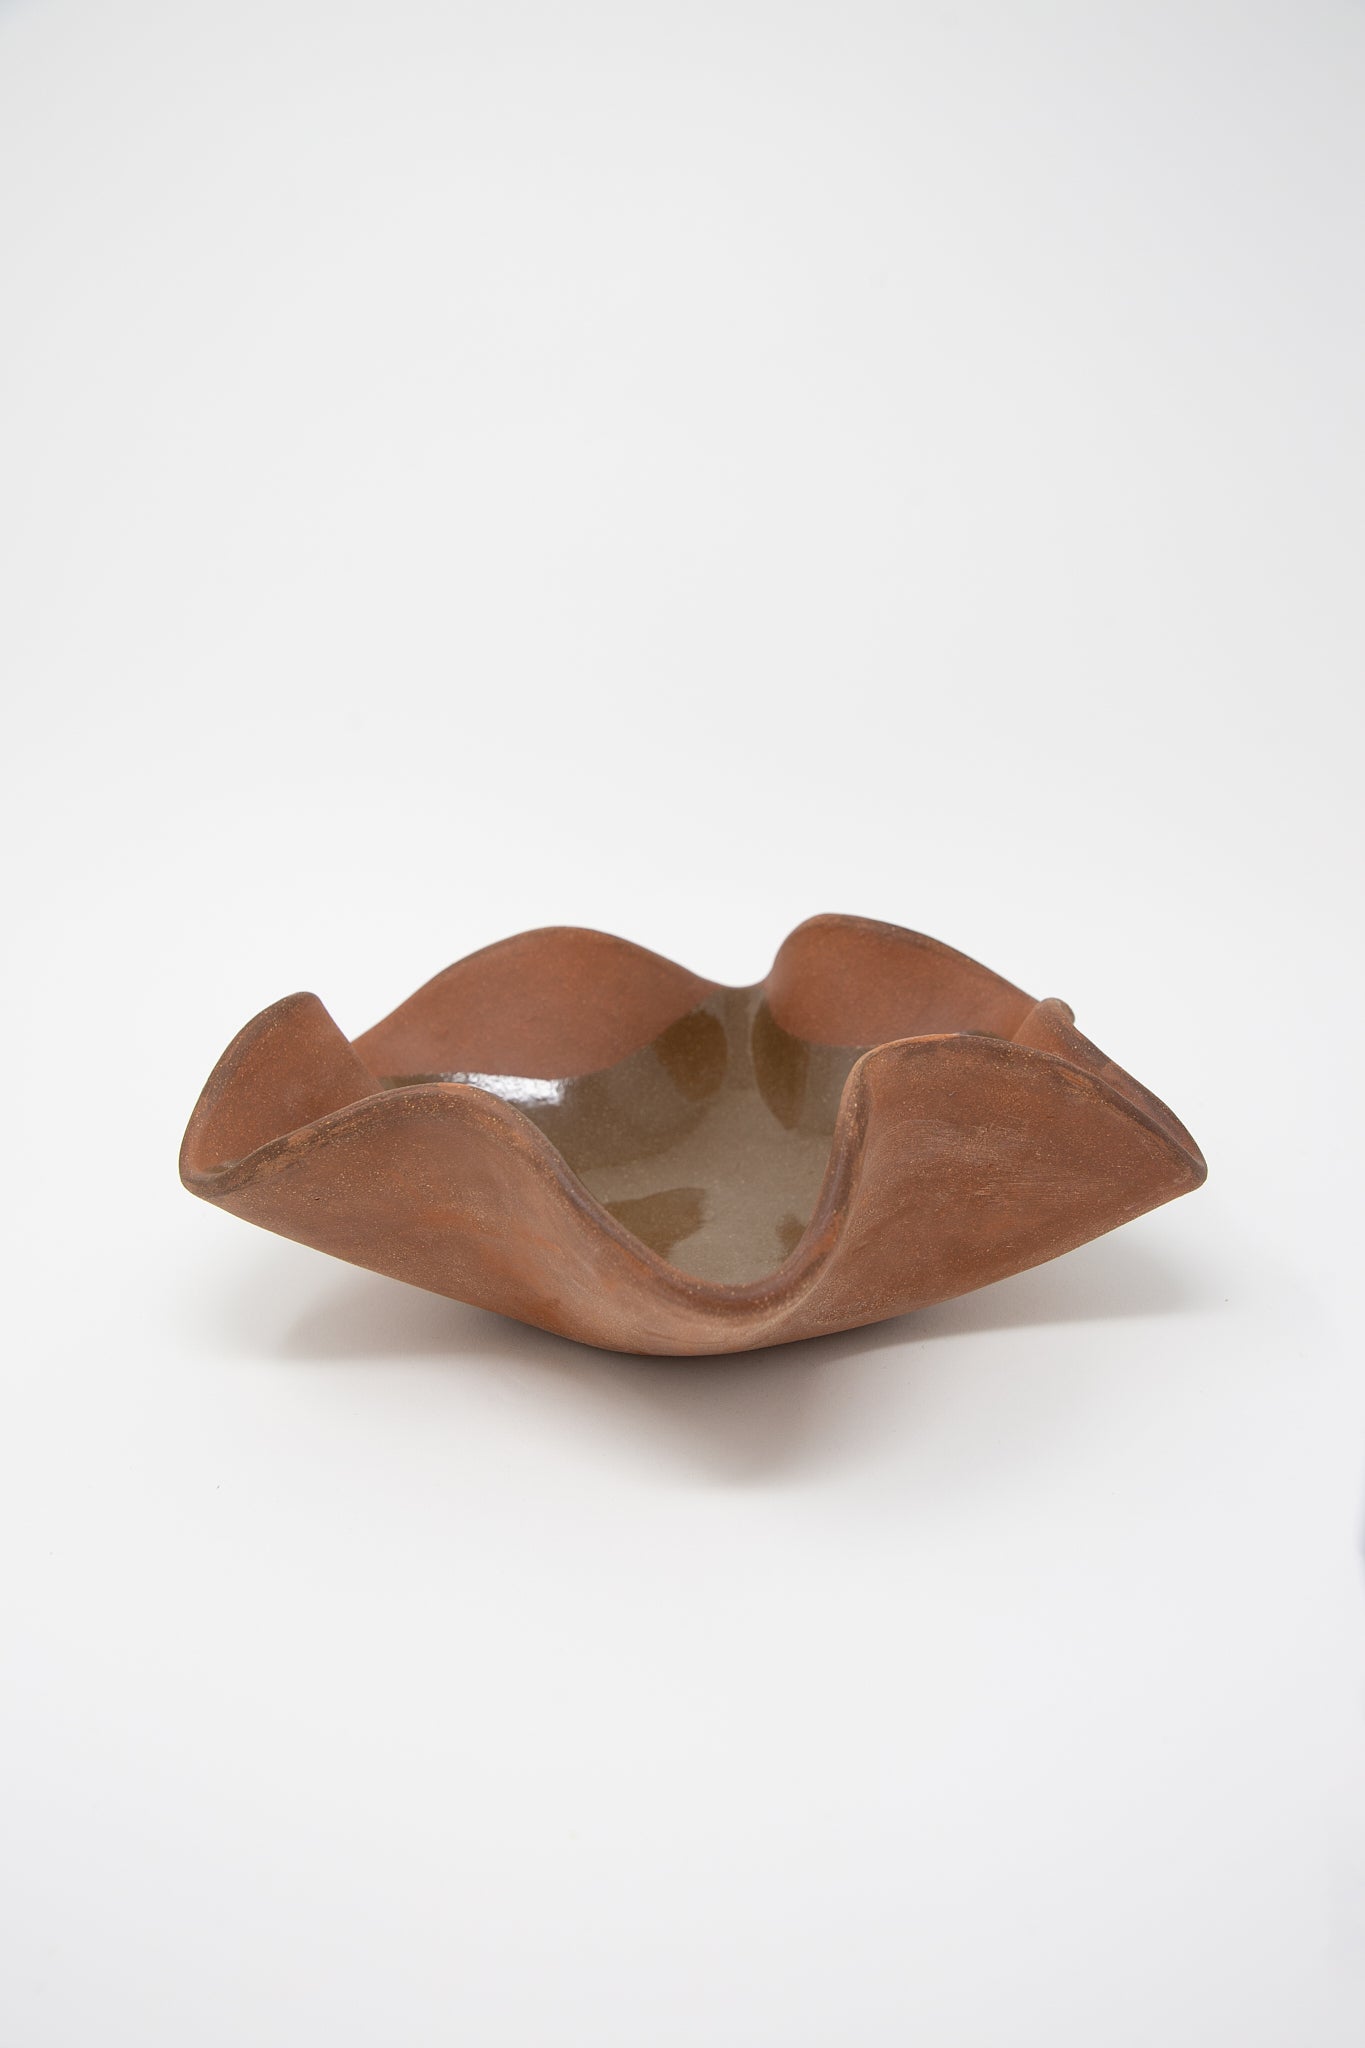 A functional, Lost Quarry hand-built Ruffle Bowl in Terracotta on a white background.